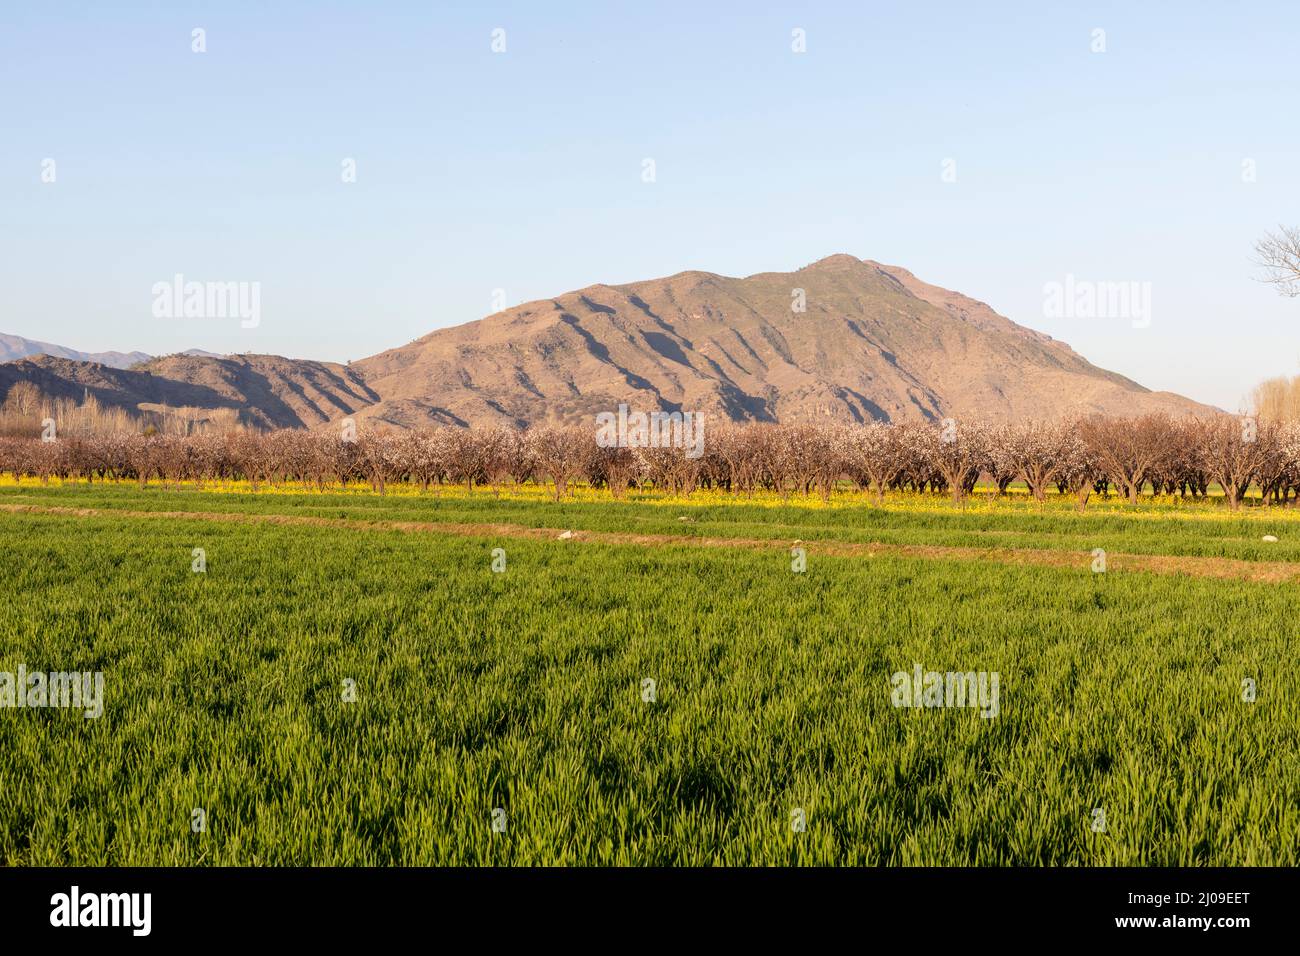 Apricot farming in Swat valley, Pakistan Stock Photo